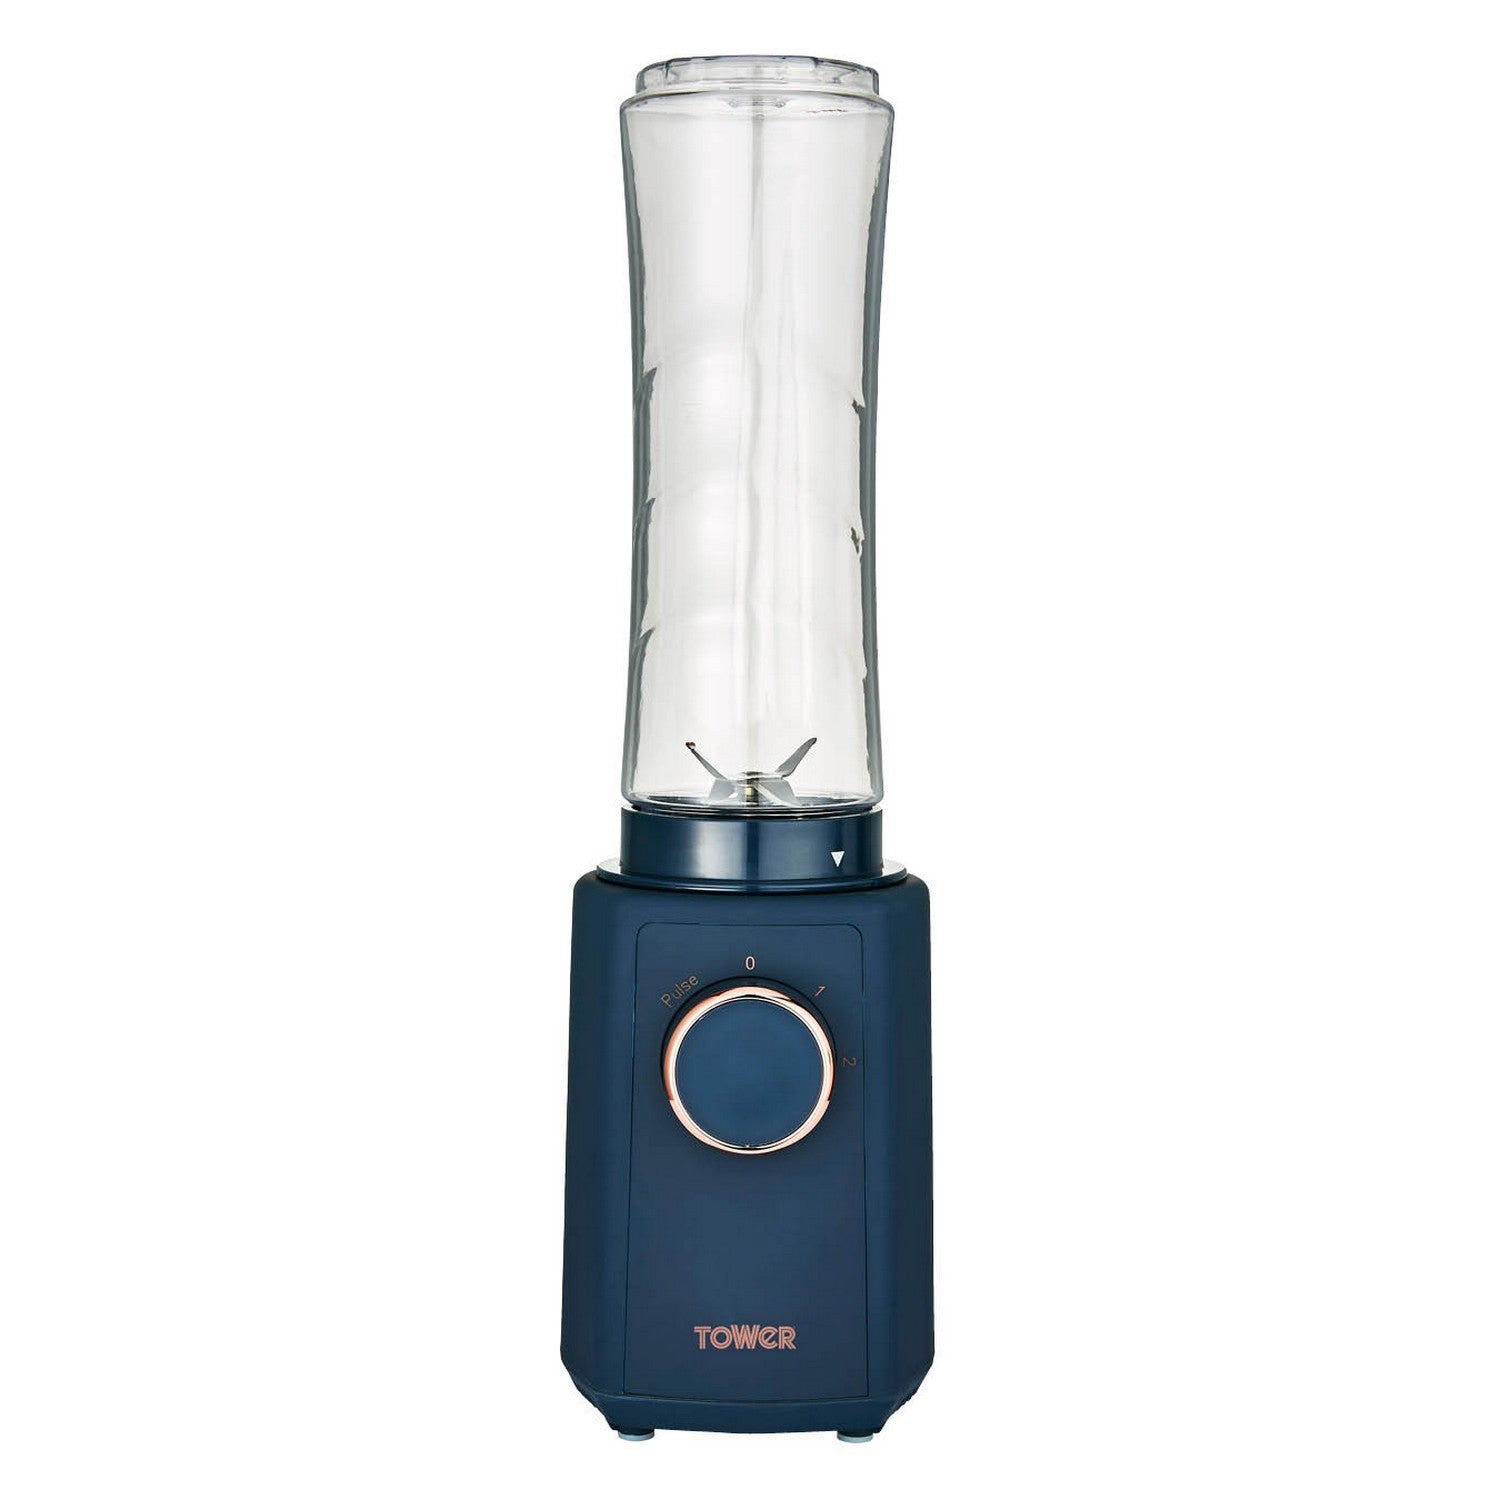 Tower 300W Cavaletto Blue Rose Gold Personal Blender